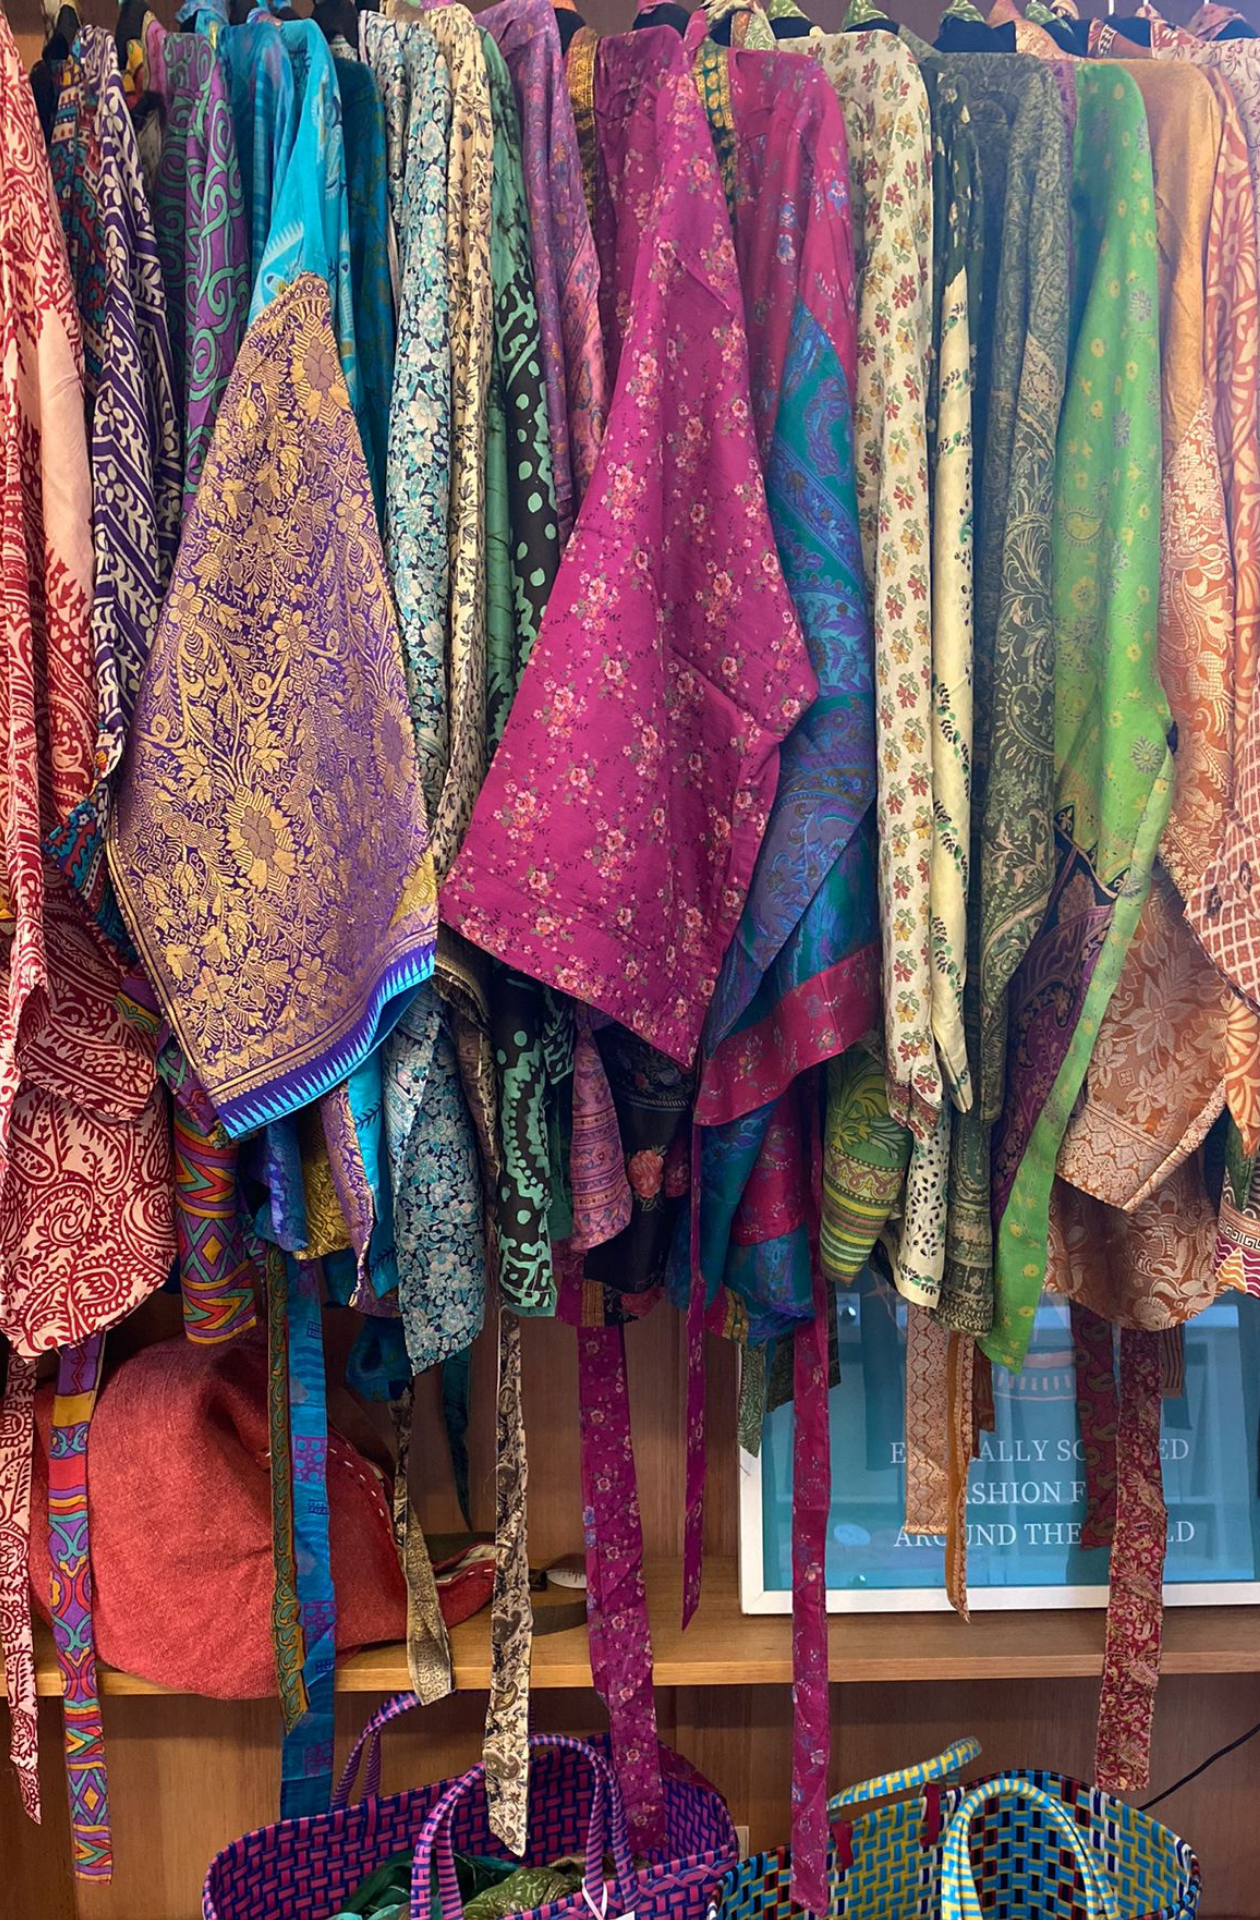 A collection of sari silk jackets lined up next to eachother to show how many colour varieties there are.